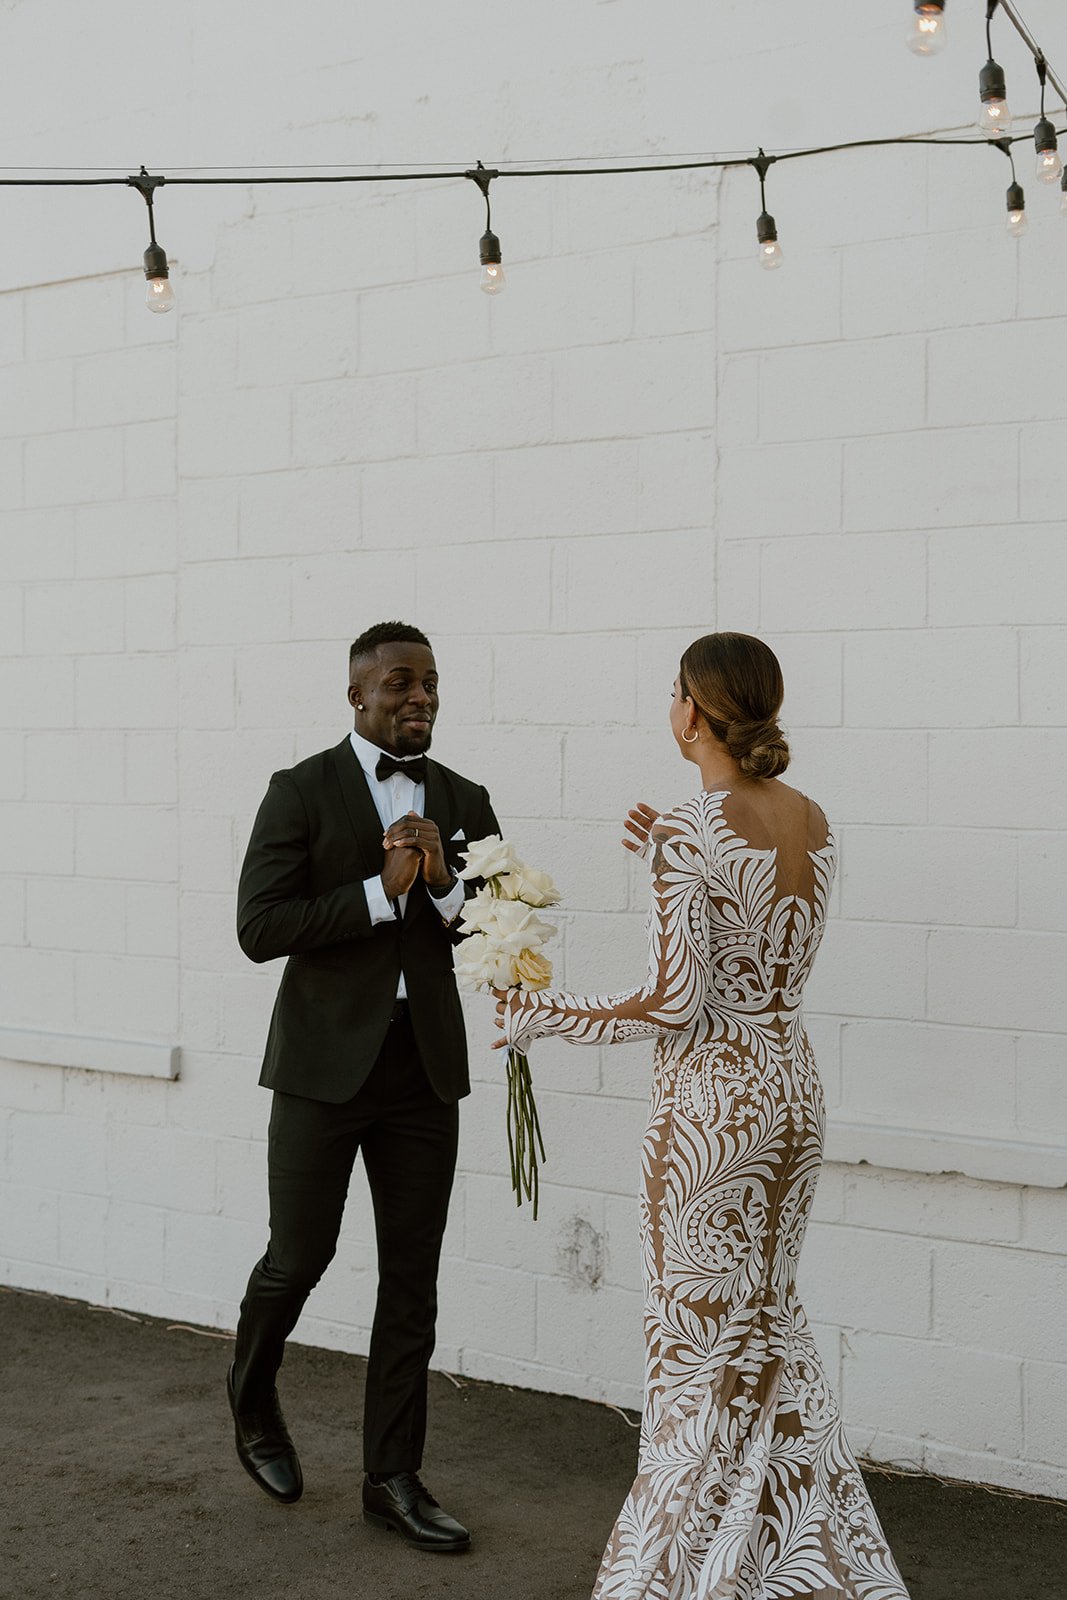  a bride and groom sharing an emotional first look before their wedding ceremony. the bride is wearing rue de seine reno wedding dress, which is a long sleeve fitted wedding gown with bold lace and a nude illusion mesh. 